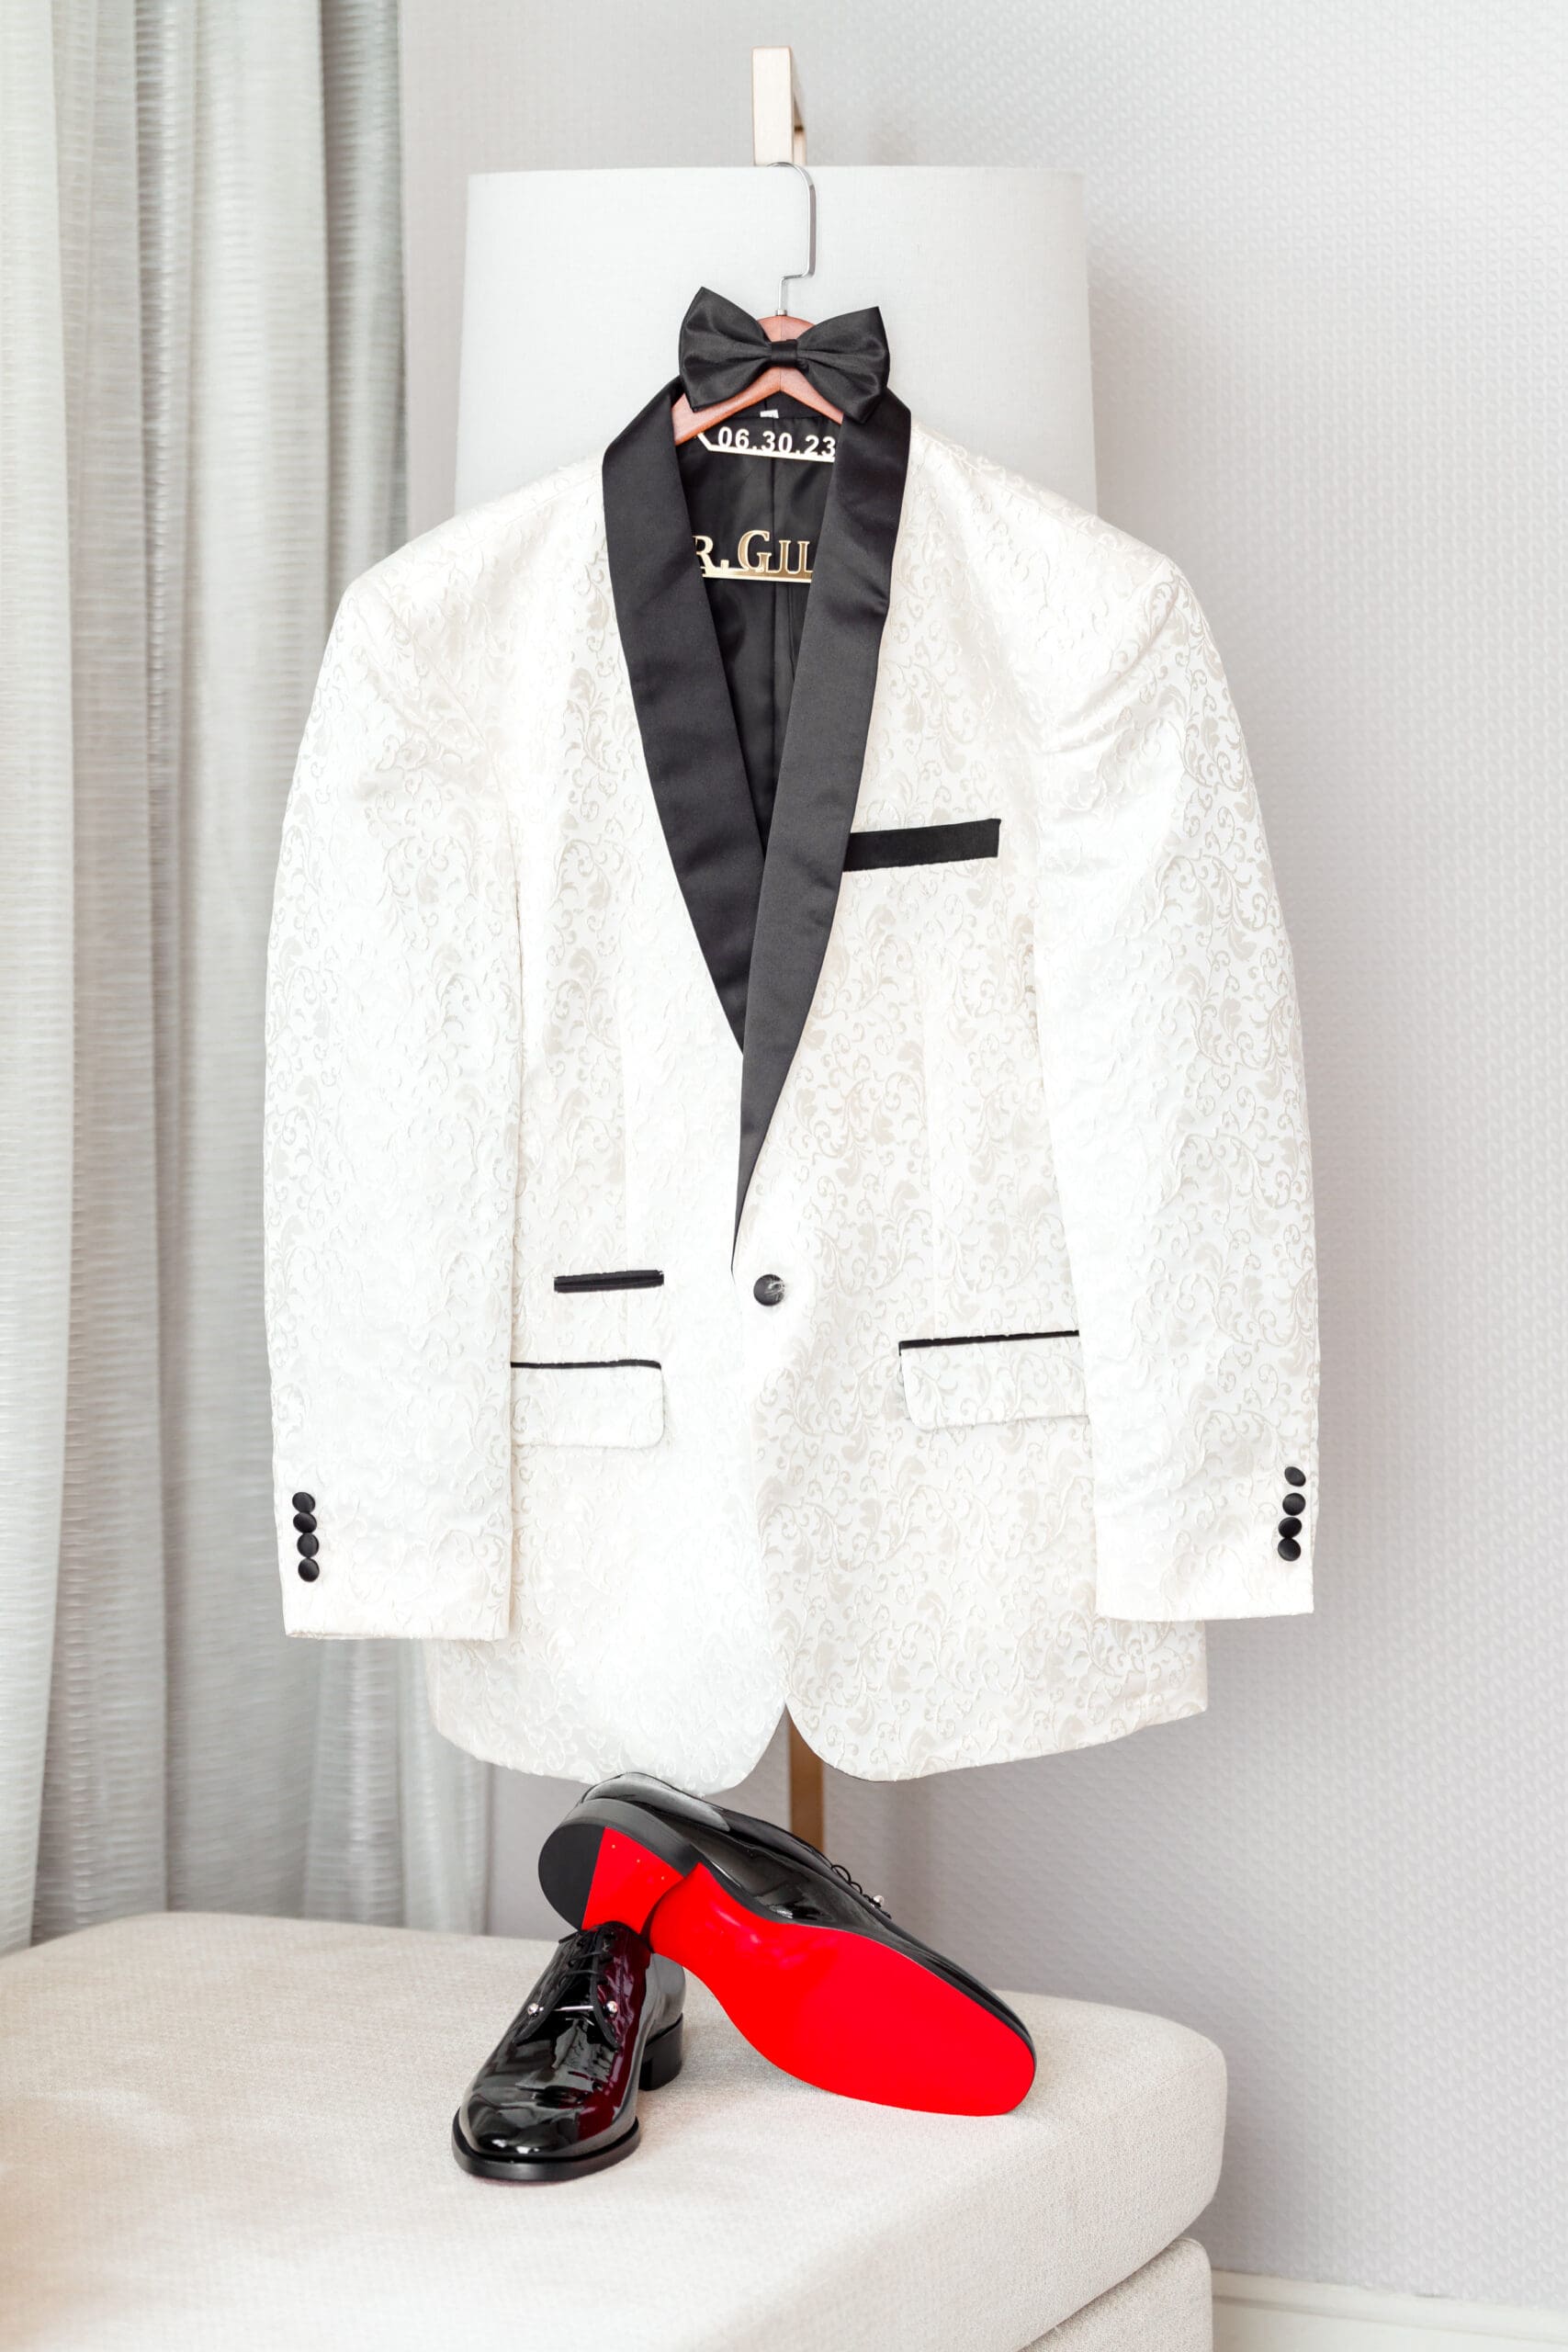 Glen's sports coat and bow tie hang neatly above his shoes, showcasing the red soles.